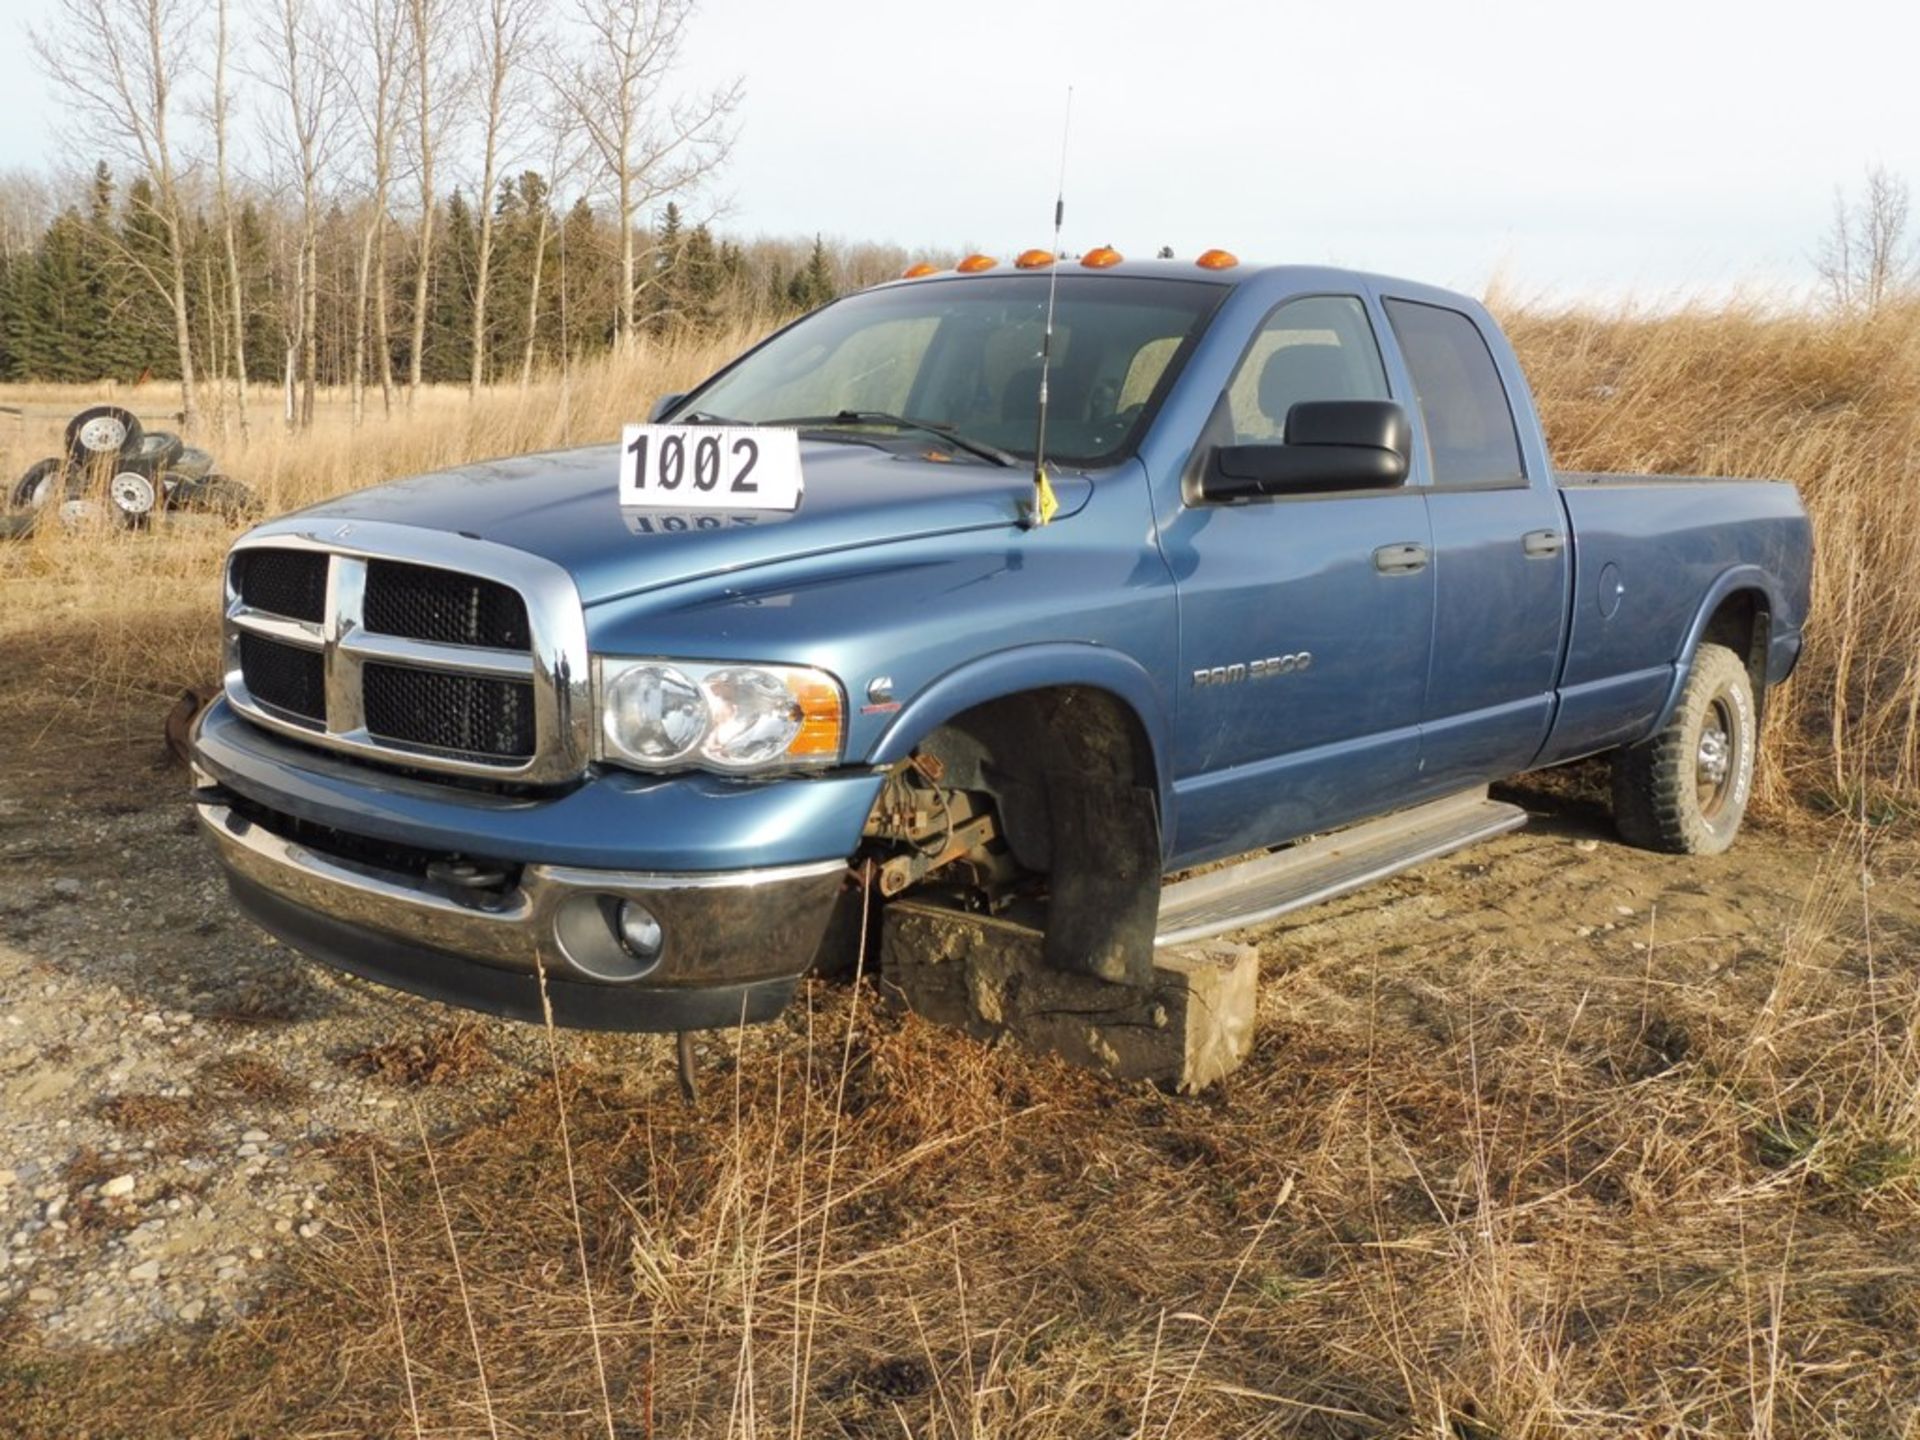 2005 Dodge RAM 3500 SLE QUAD CAB LB 4X4 TRUCK SELLING AS IS - PARTS ONLY